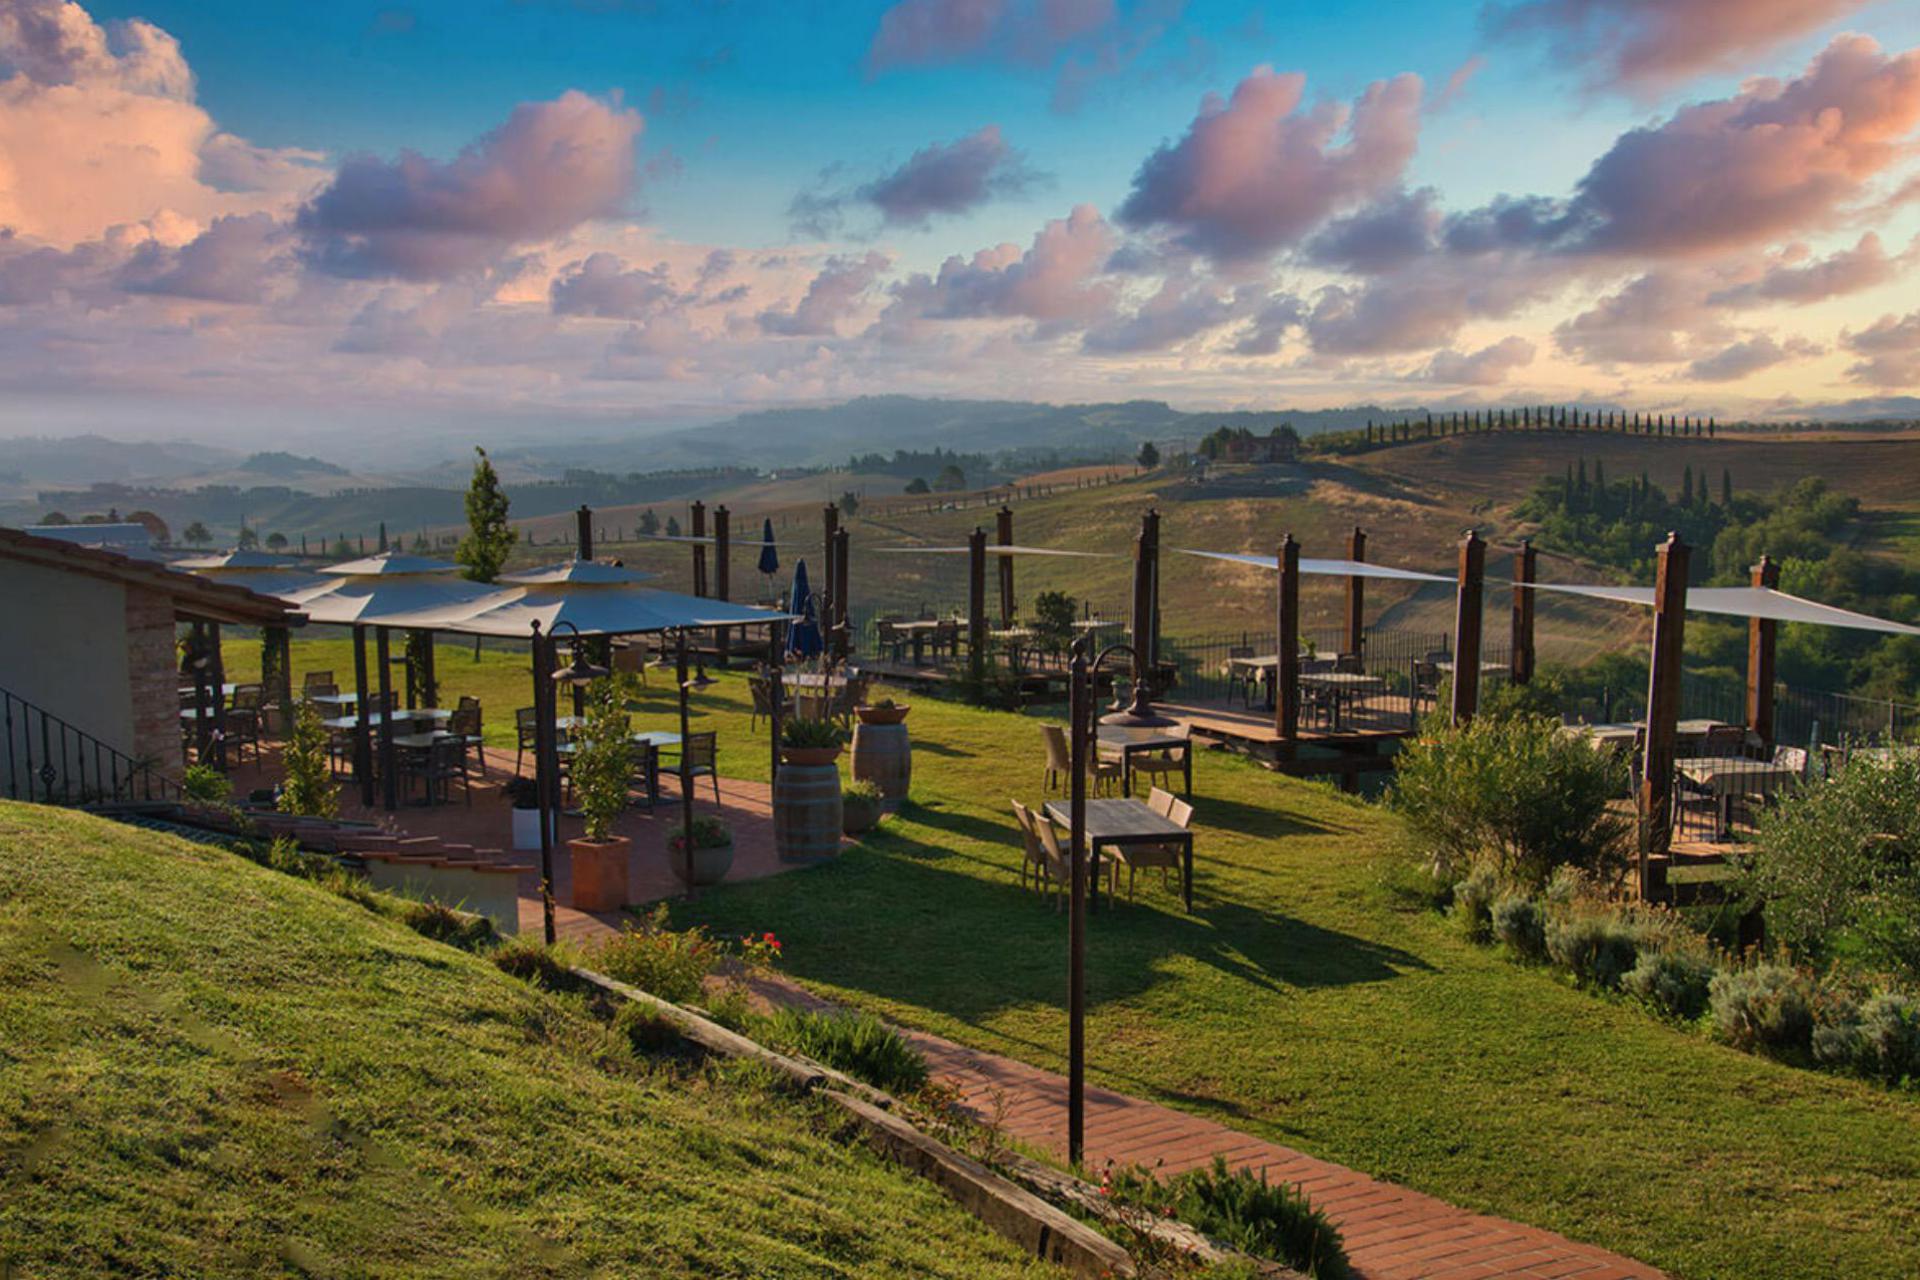 Agriturismo Tuscany Agriturismo Tuscany, kid friendly and super welcoming!